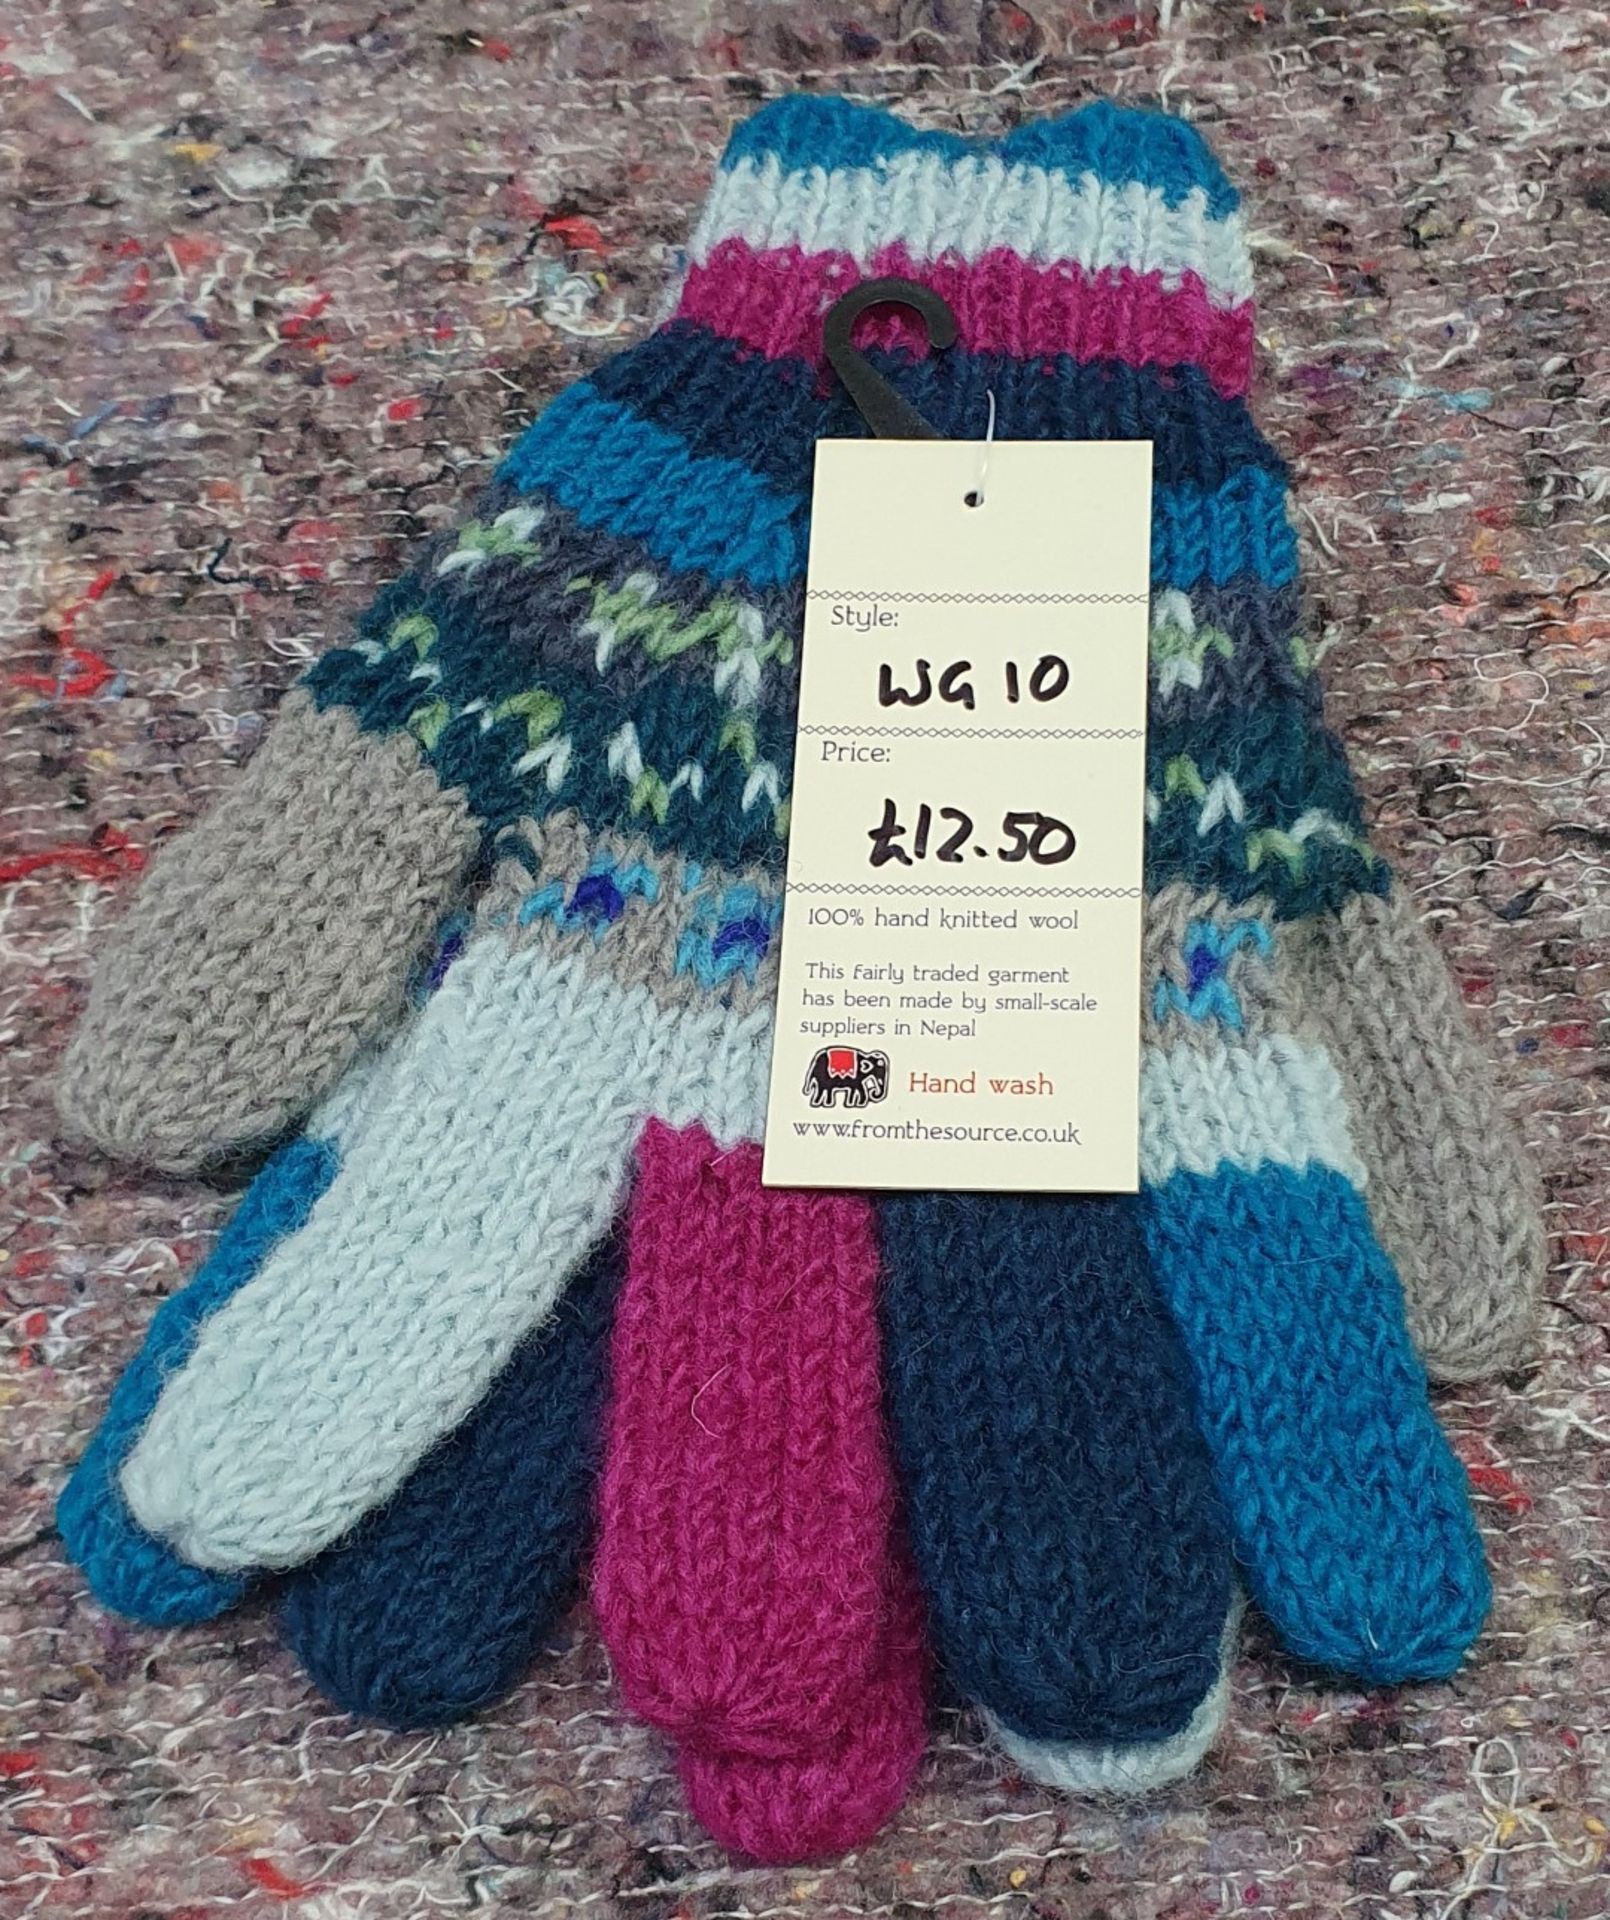 13 x Assorted Bobble Hats and Woolly Gloves by From The Source - New Stock - Ref: TCH236 - CL840 - - Image 20 of 24